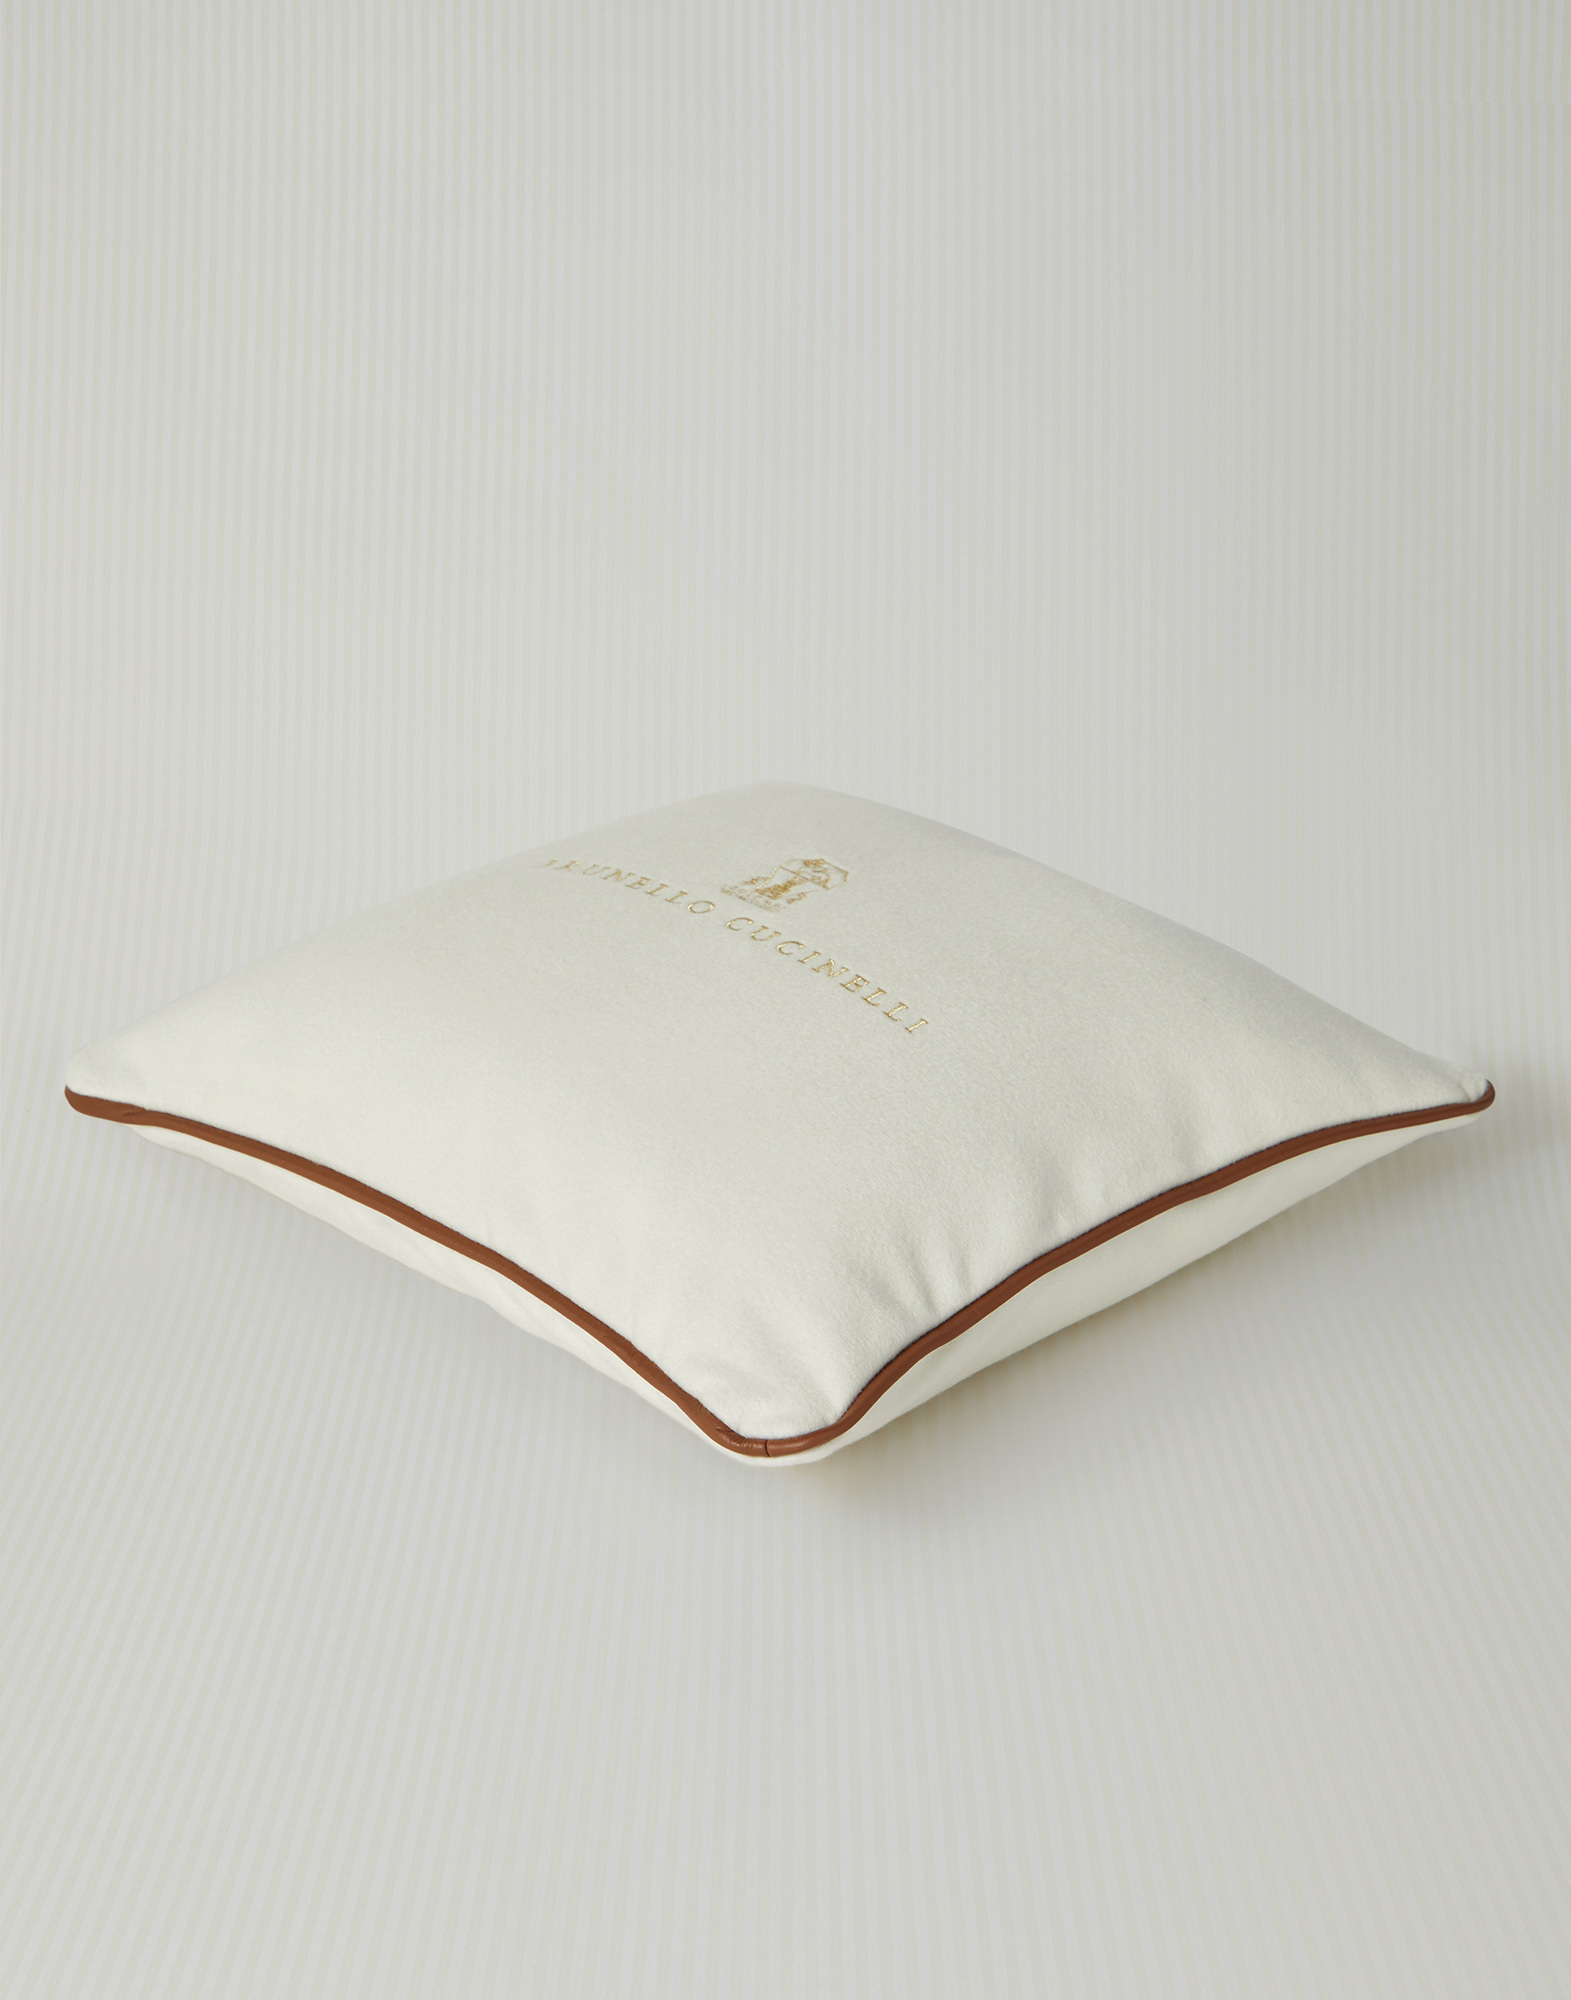 Large "Winter in White" cushion